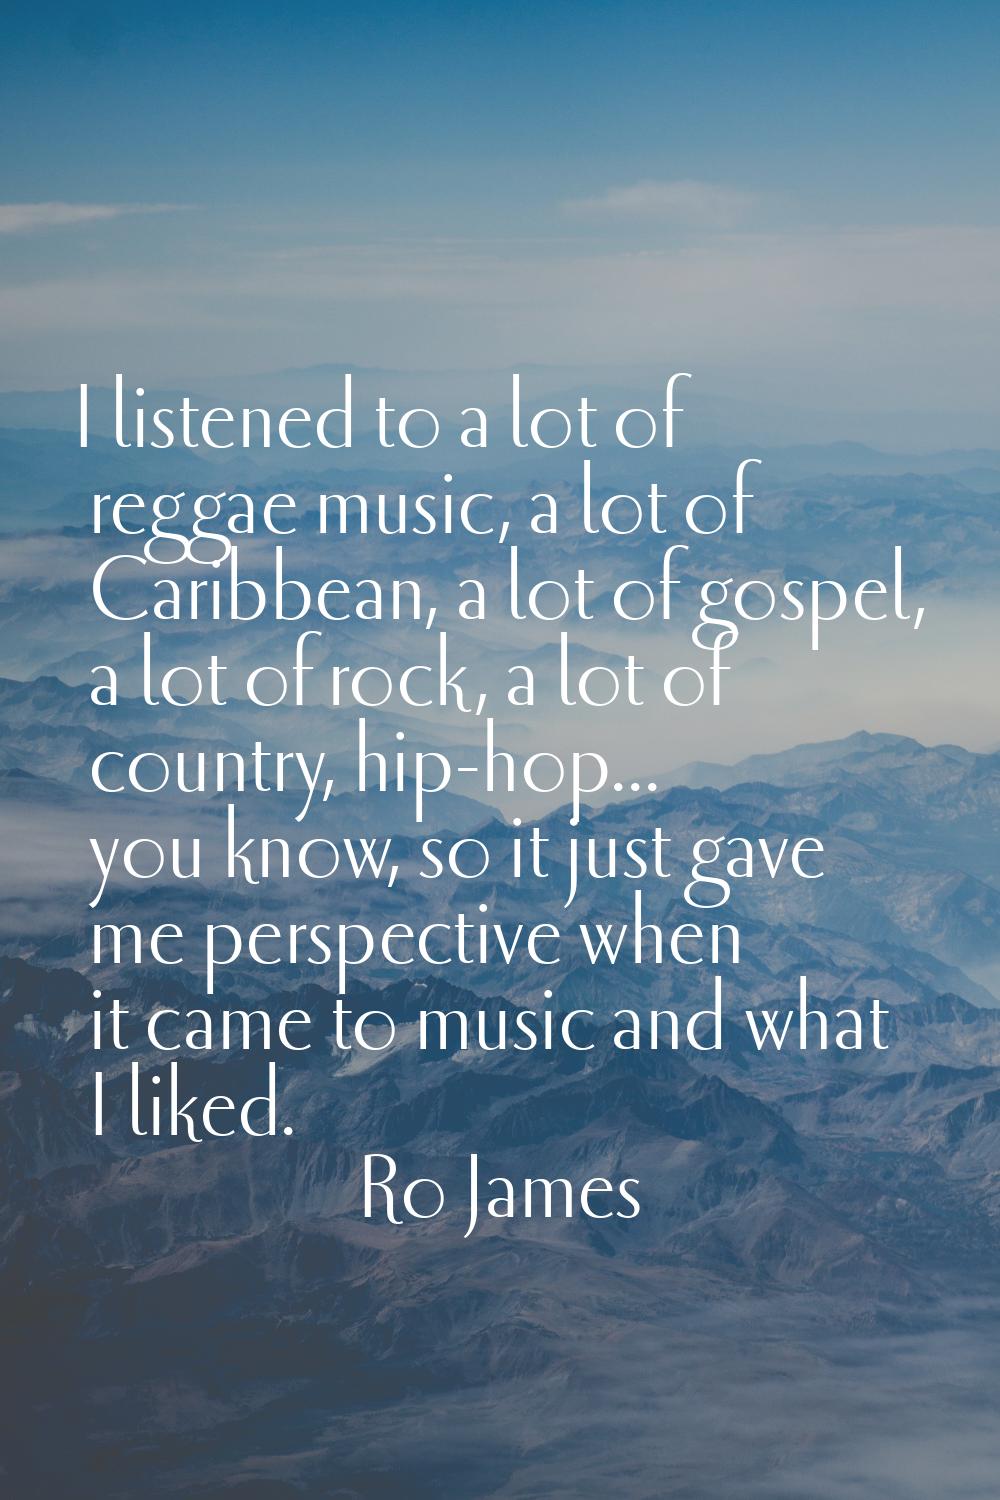 I listened to a lot of reggae music, a lot of Caribbean, a lot of gospel, a lot of rock, a lot of c